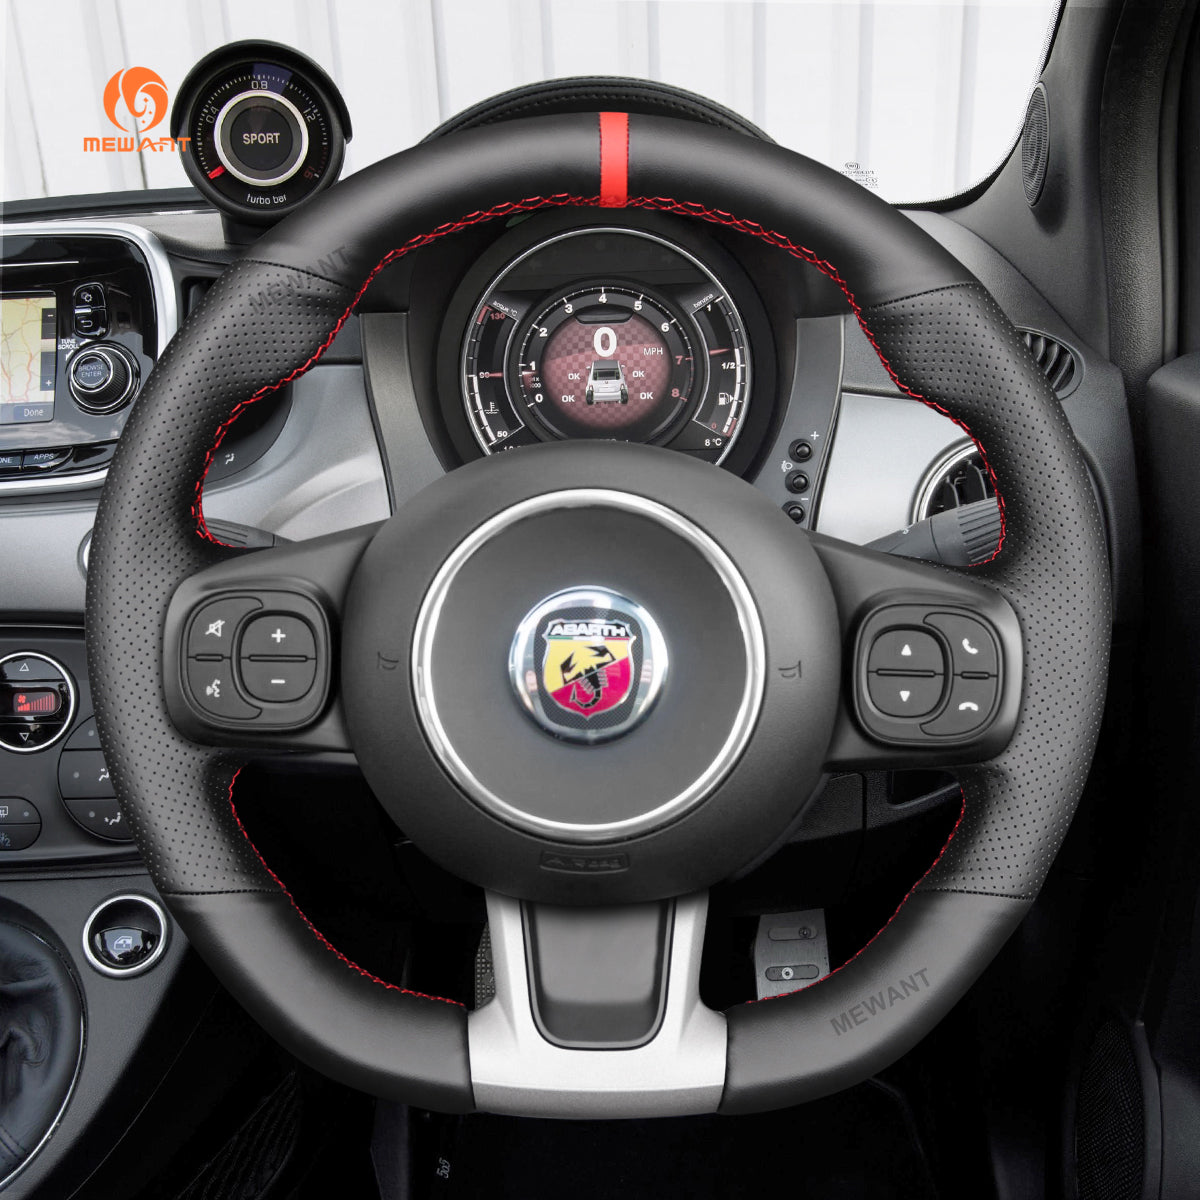 Car Steering Wheel Cover for Abarth 595(C) 695(C) Fiat 500 Abarth 595 693